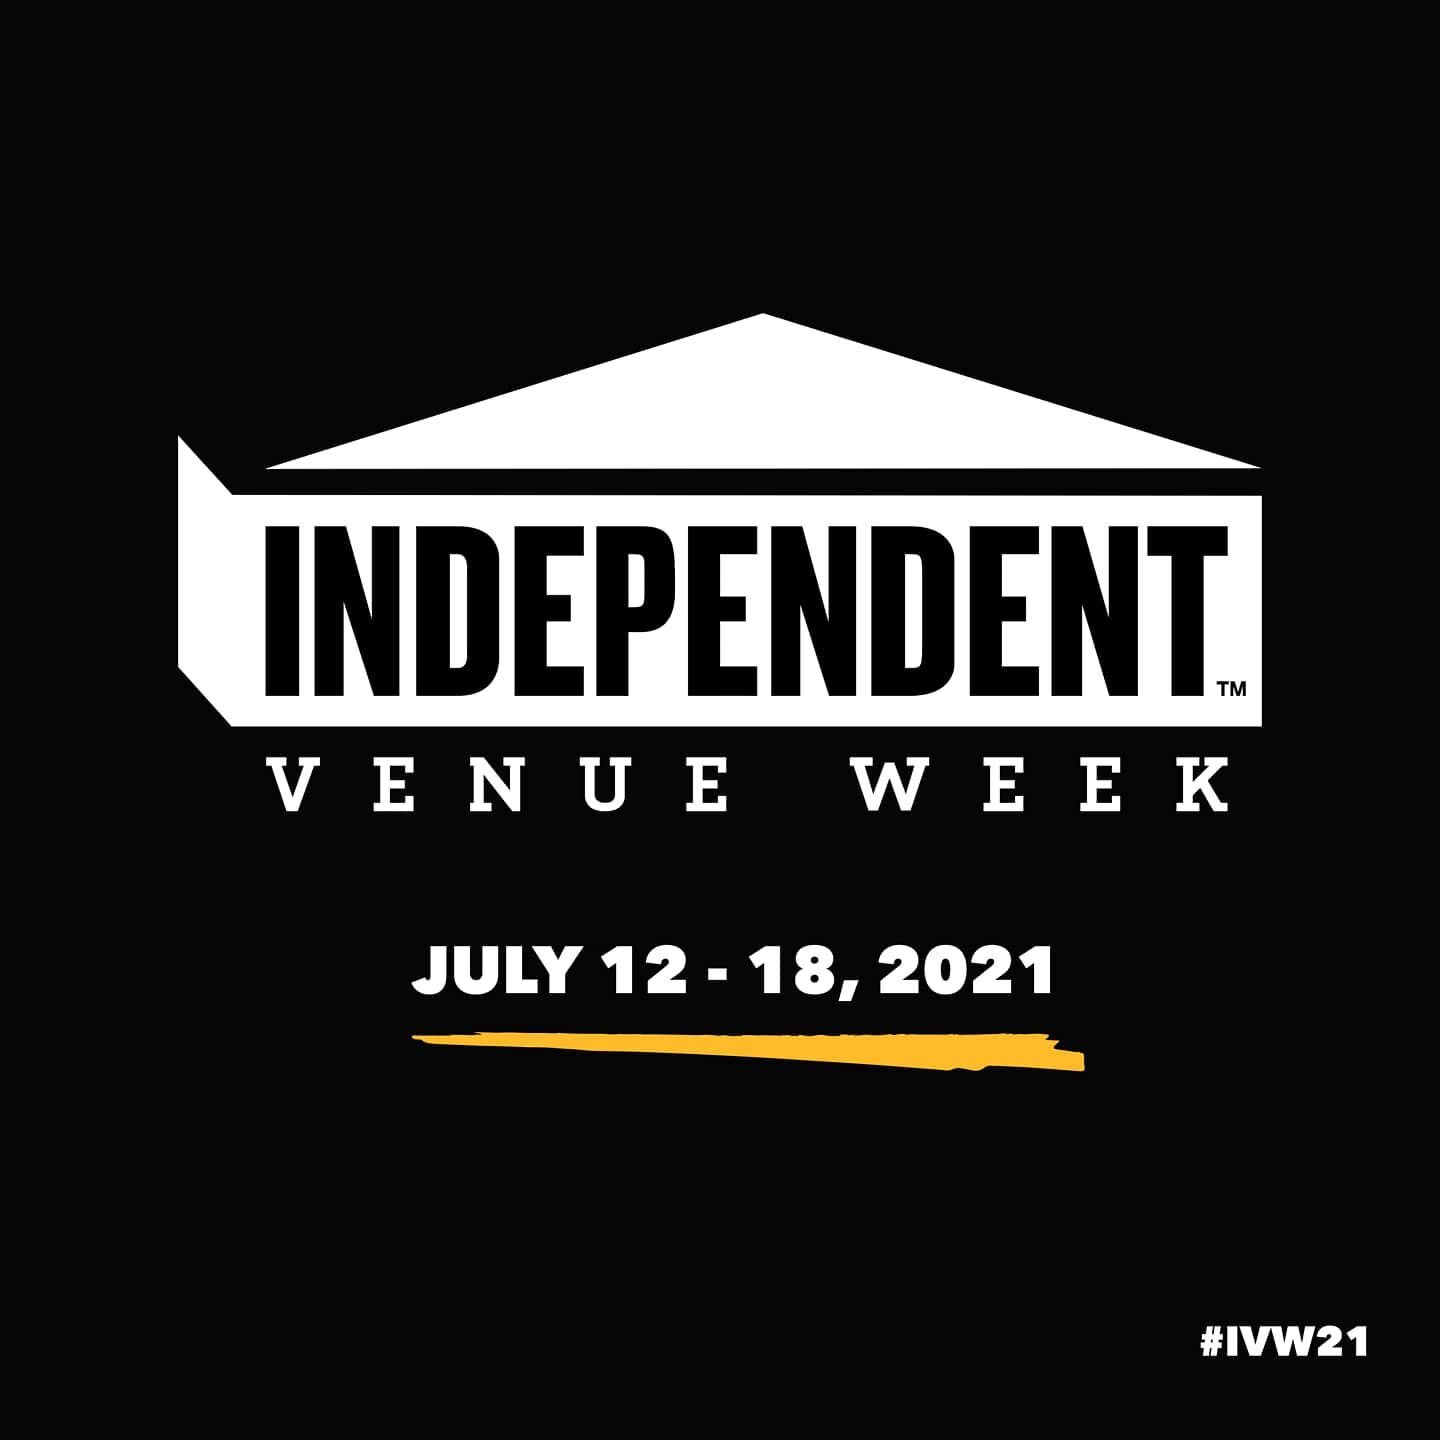 We&rsquo;re excited to join venues across the country for Independent Venue Week, July 12-18, 2021!
Find out more about #IVW21 and celebrate the spirit of independence at @ivw_us